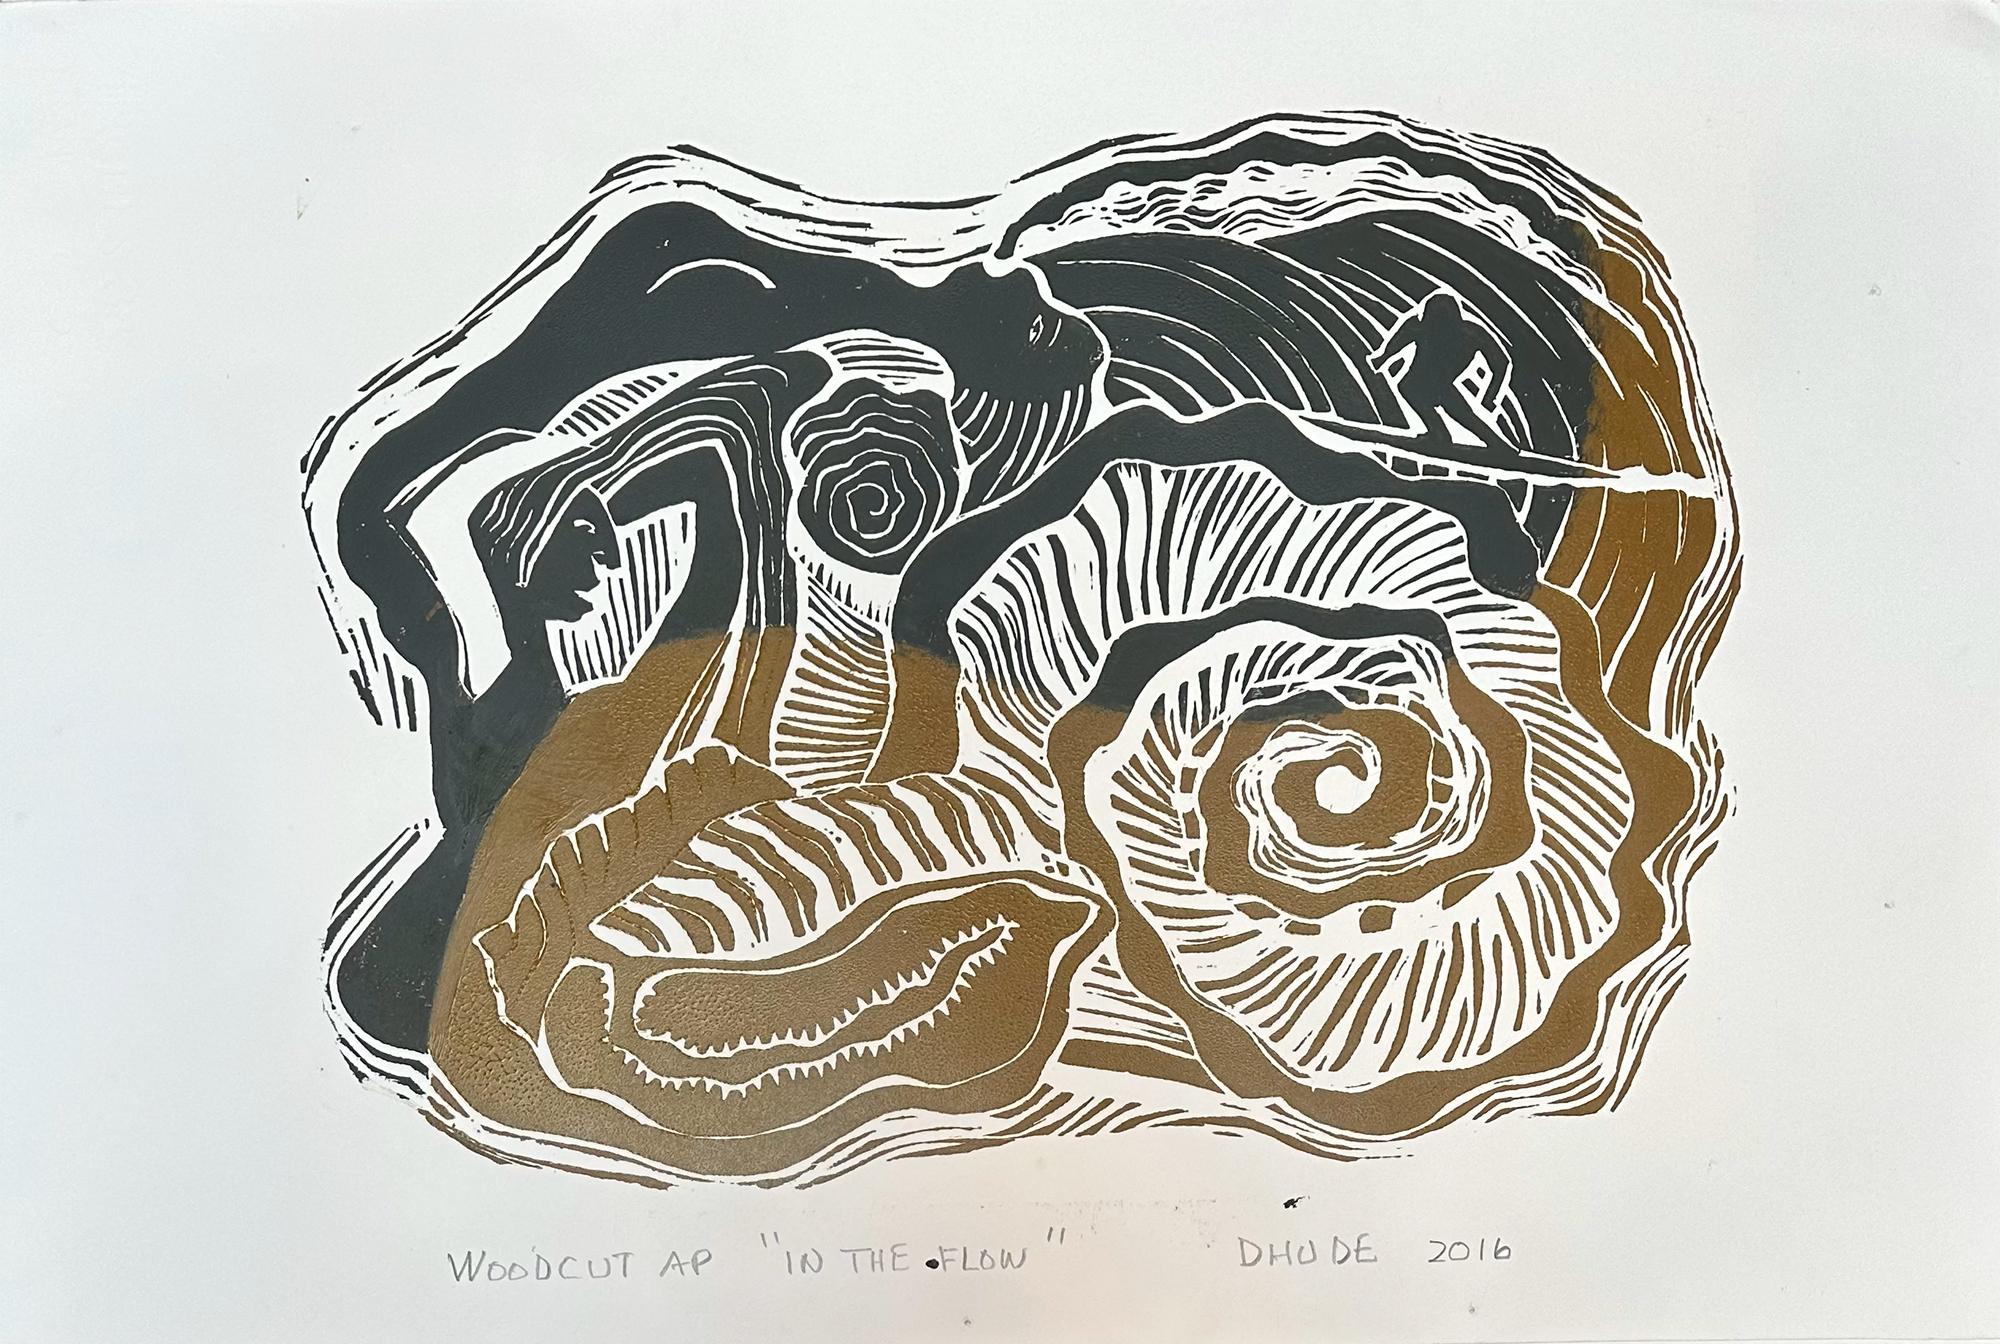 In The Flow - Surfing Art - Figurative - Woodcut Print By Marc Zimmerman

Limited Edition 01/04

This masterwork is exhibited in the Zimmerman Gallery, Carmel CA.

Immerse yourself in the captivating world of surfing and ocean vibes with Marc